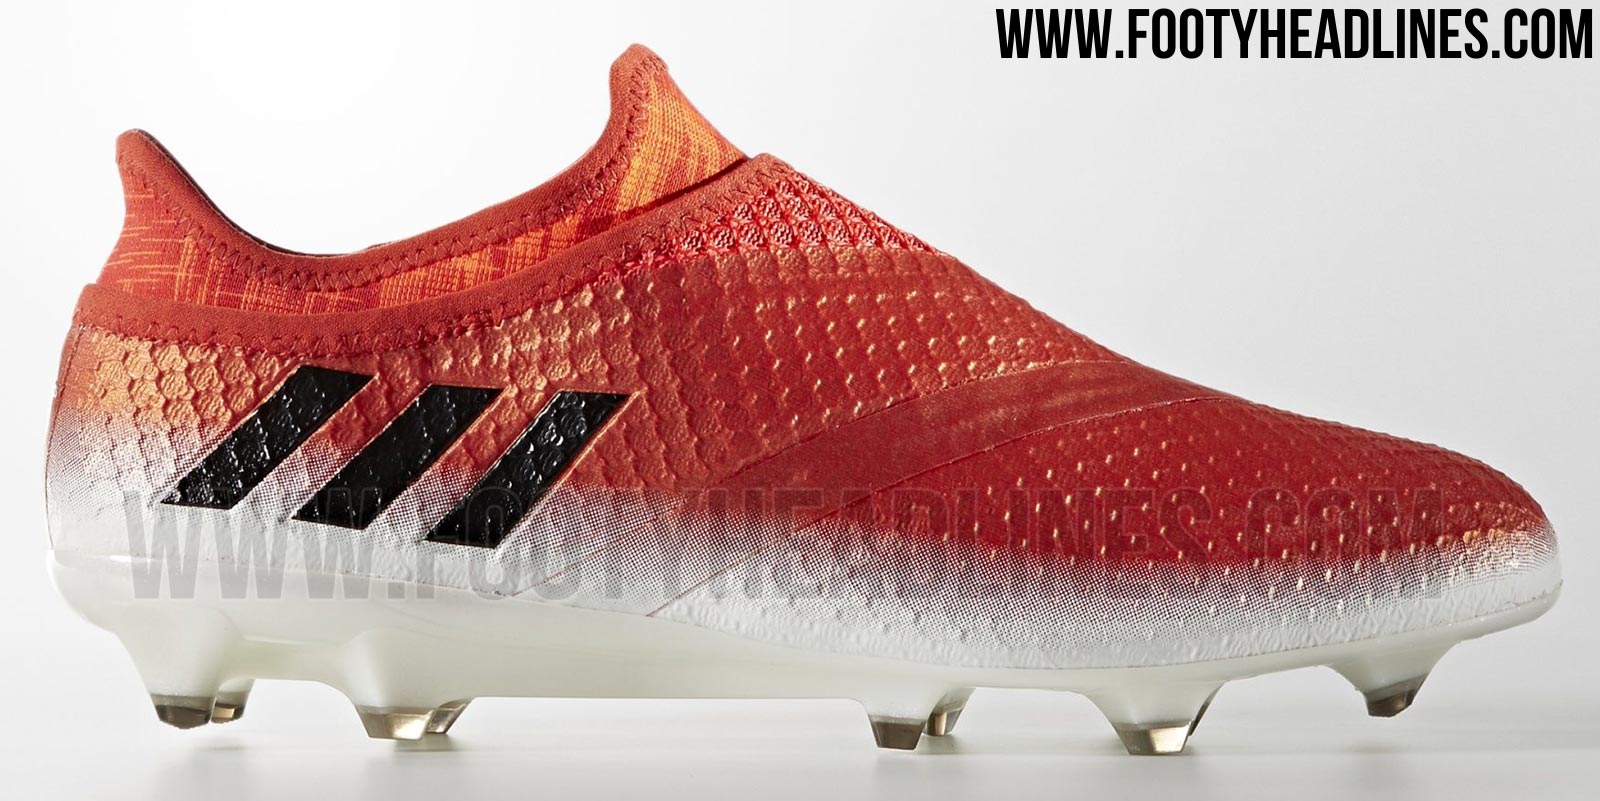 Adidas Messi Red Limit Boots - Footy